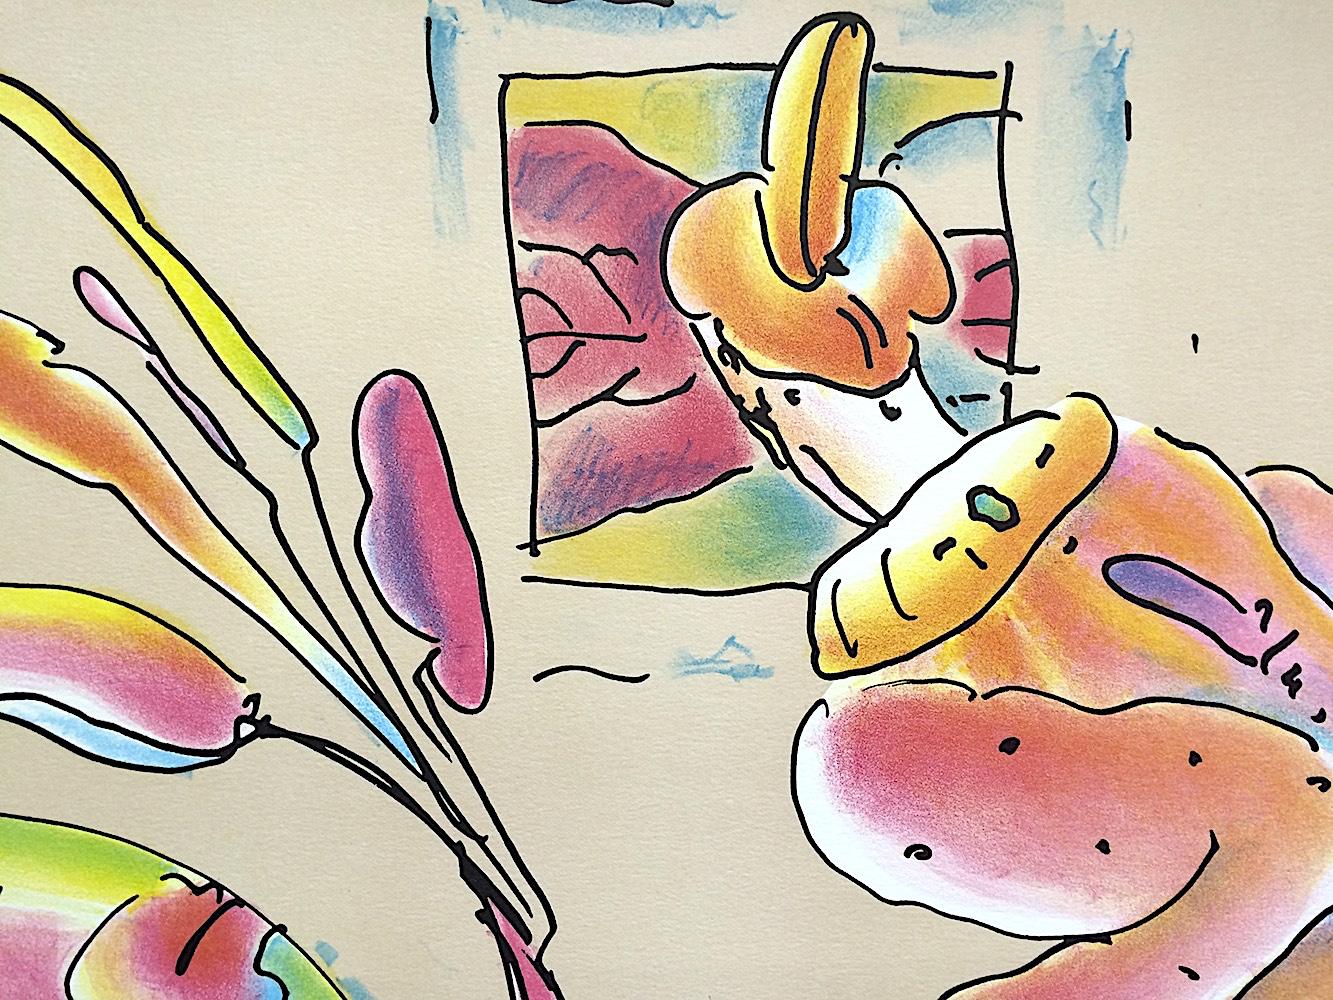 SAGE AT WINDOW Signed Lithograph, Robed Man, Cattails, Beige Room, Pop Art - Print by Peter Max